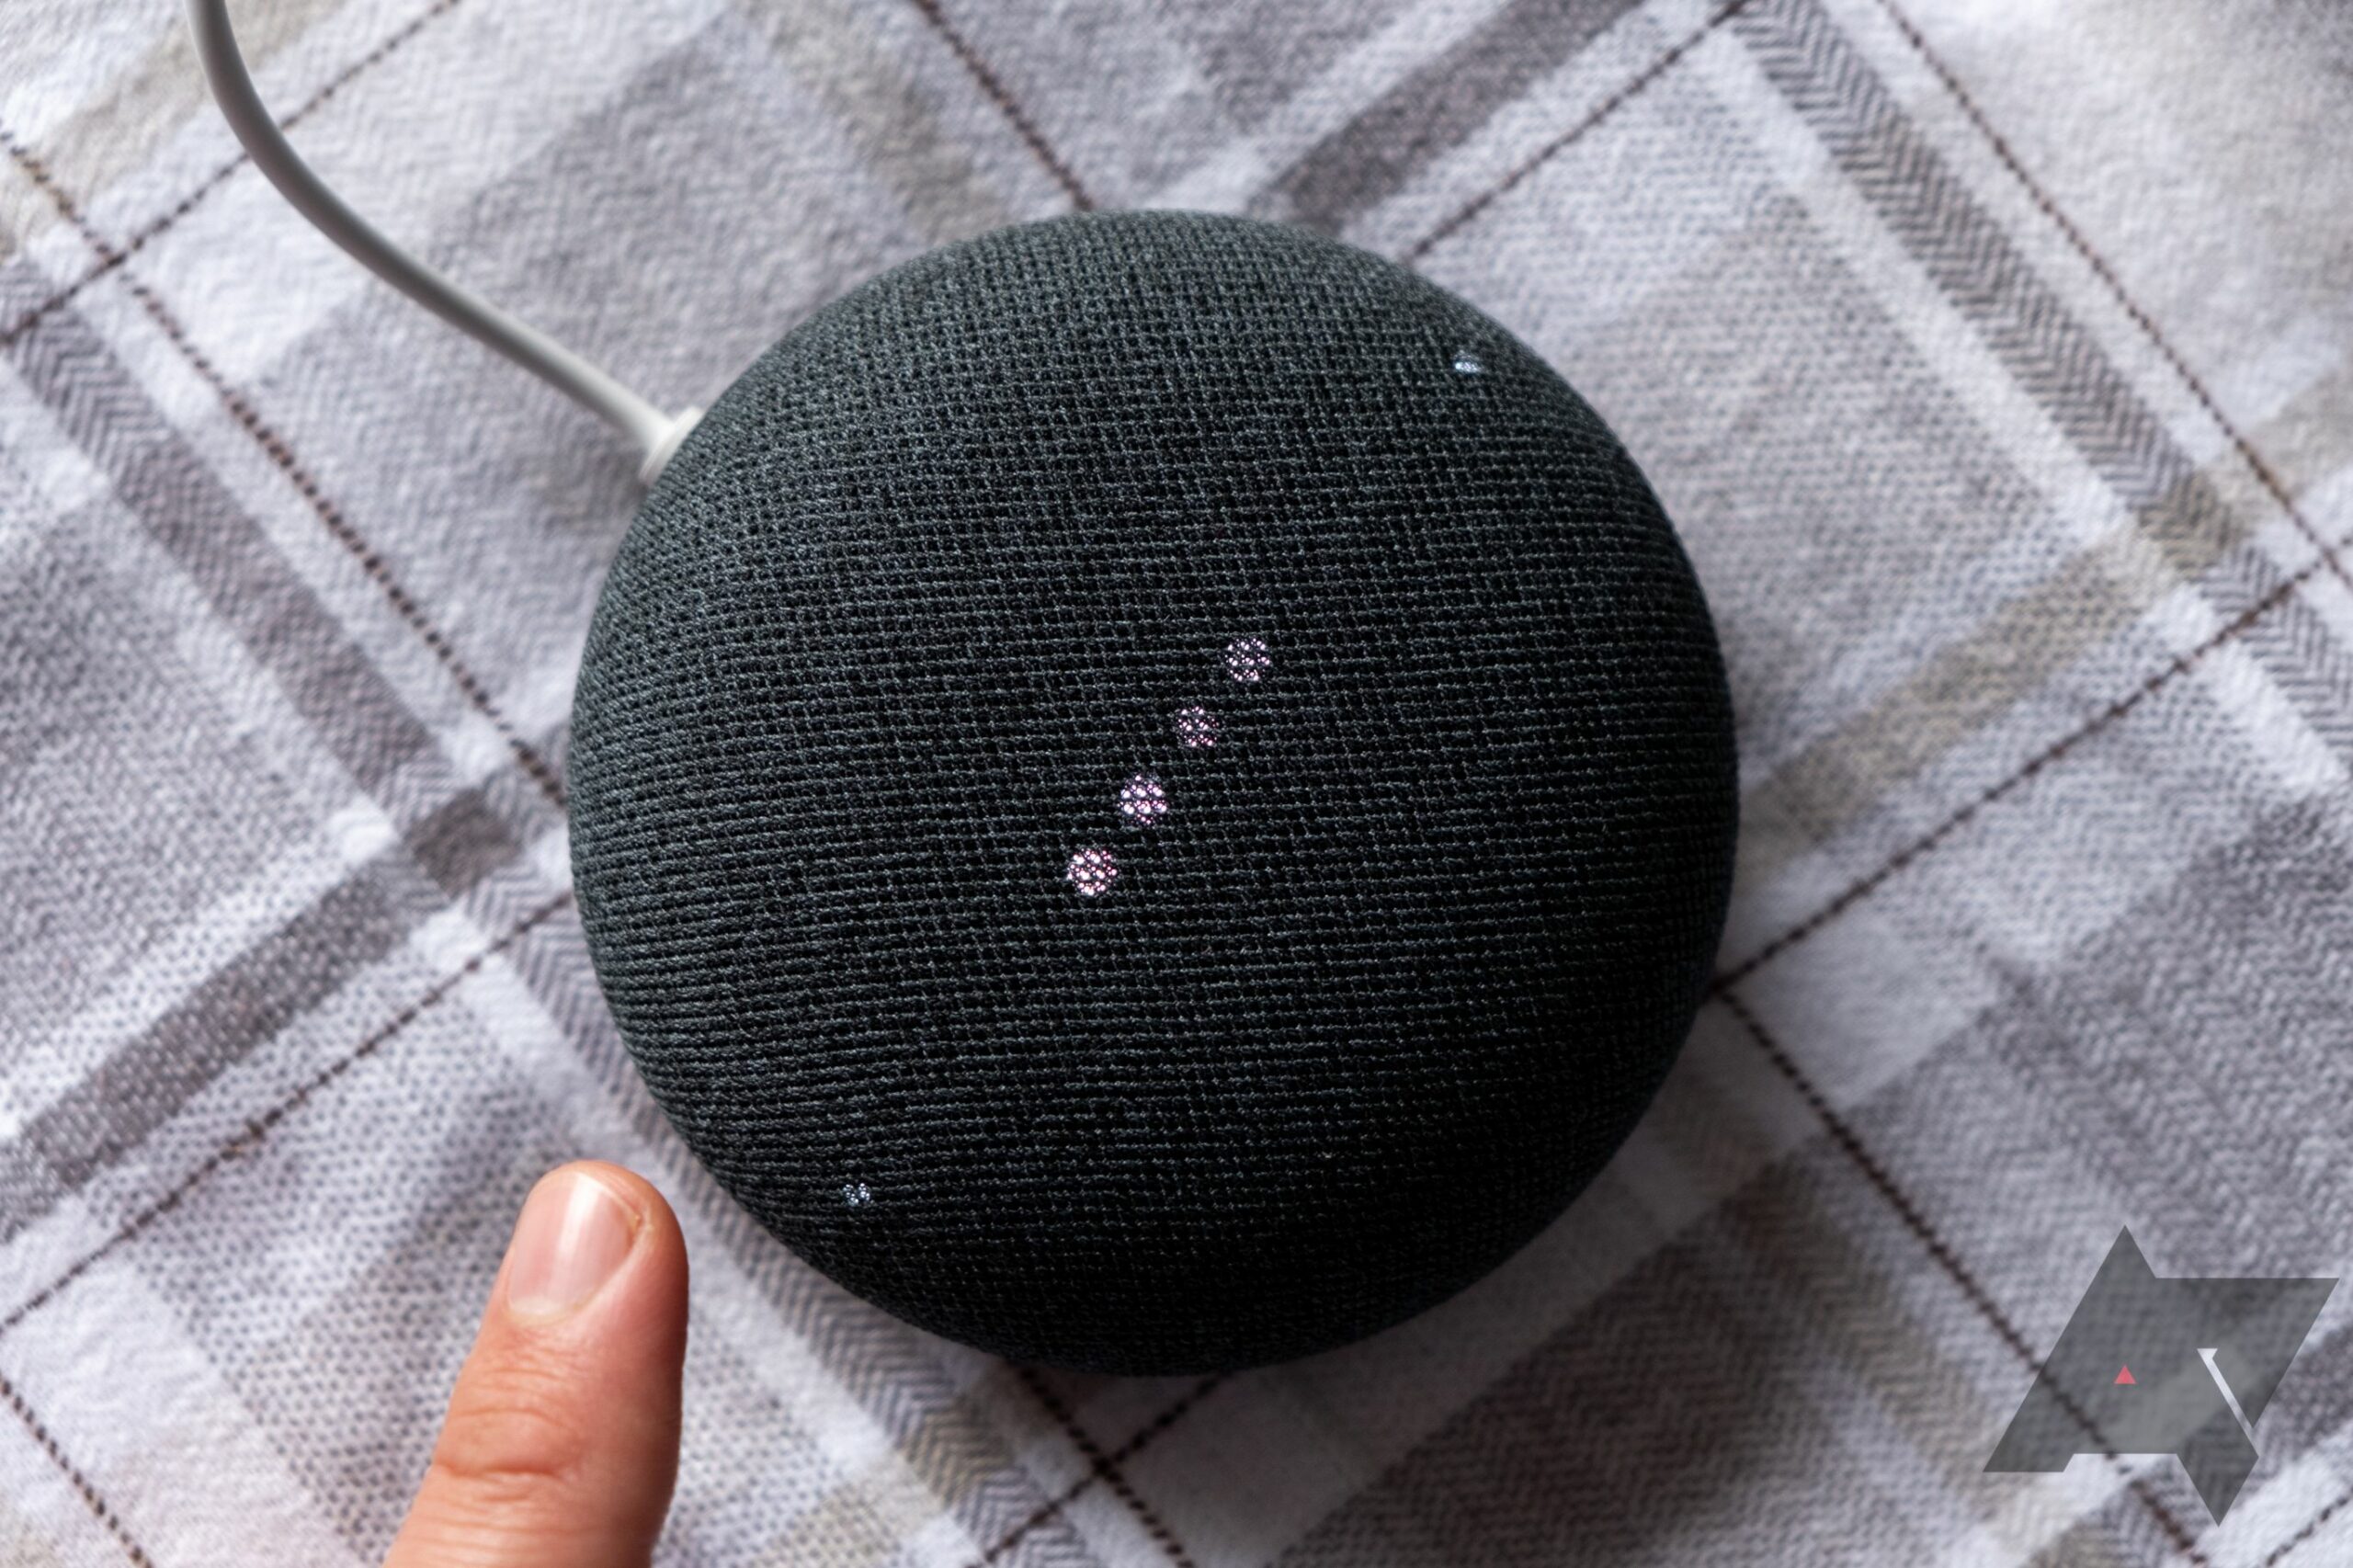 You are currently viewing Grab Google’s delightful Nest Mini smart speaker for a mere $18 while you can
<span class="bsf-rt-reading-time"><span class="bsf-rt-display-label" prefix=""></span> <span class="bsf-rt-display-time" reading_time="1"></span> <span class="bsf-rt-display-postfix" postfix="min read"></span></span><!-- .bsf-rt-reading-time -->